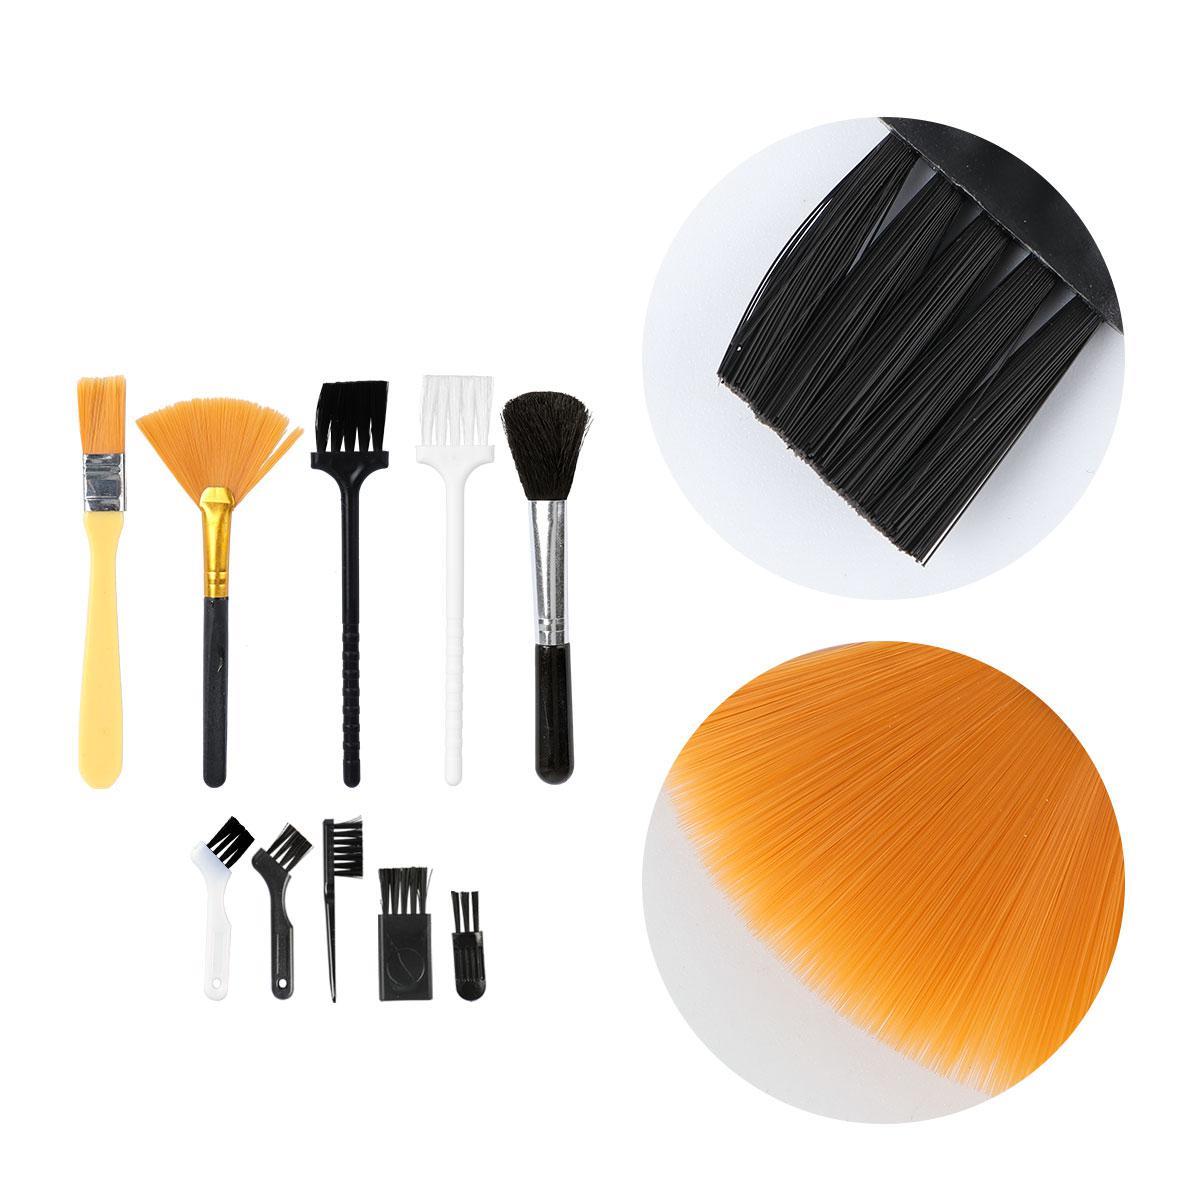 10pcs Computer Cleaning Brush Portable Cleaning Brush Cleaning Dust Brush Kit